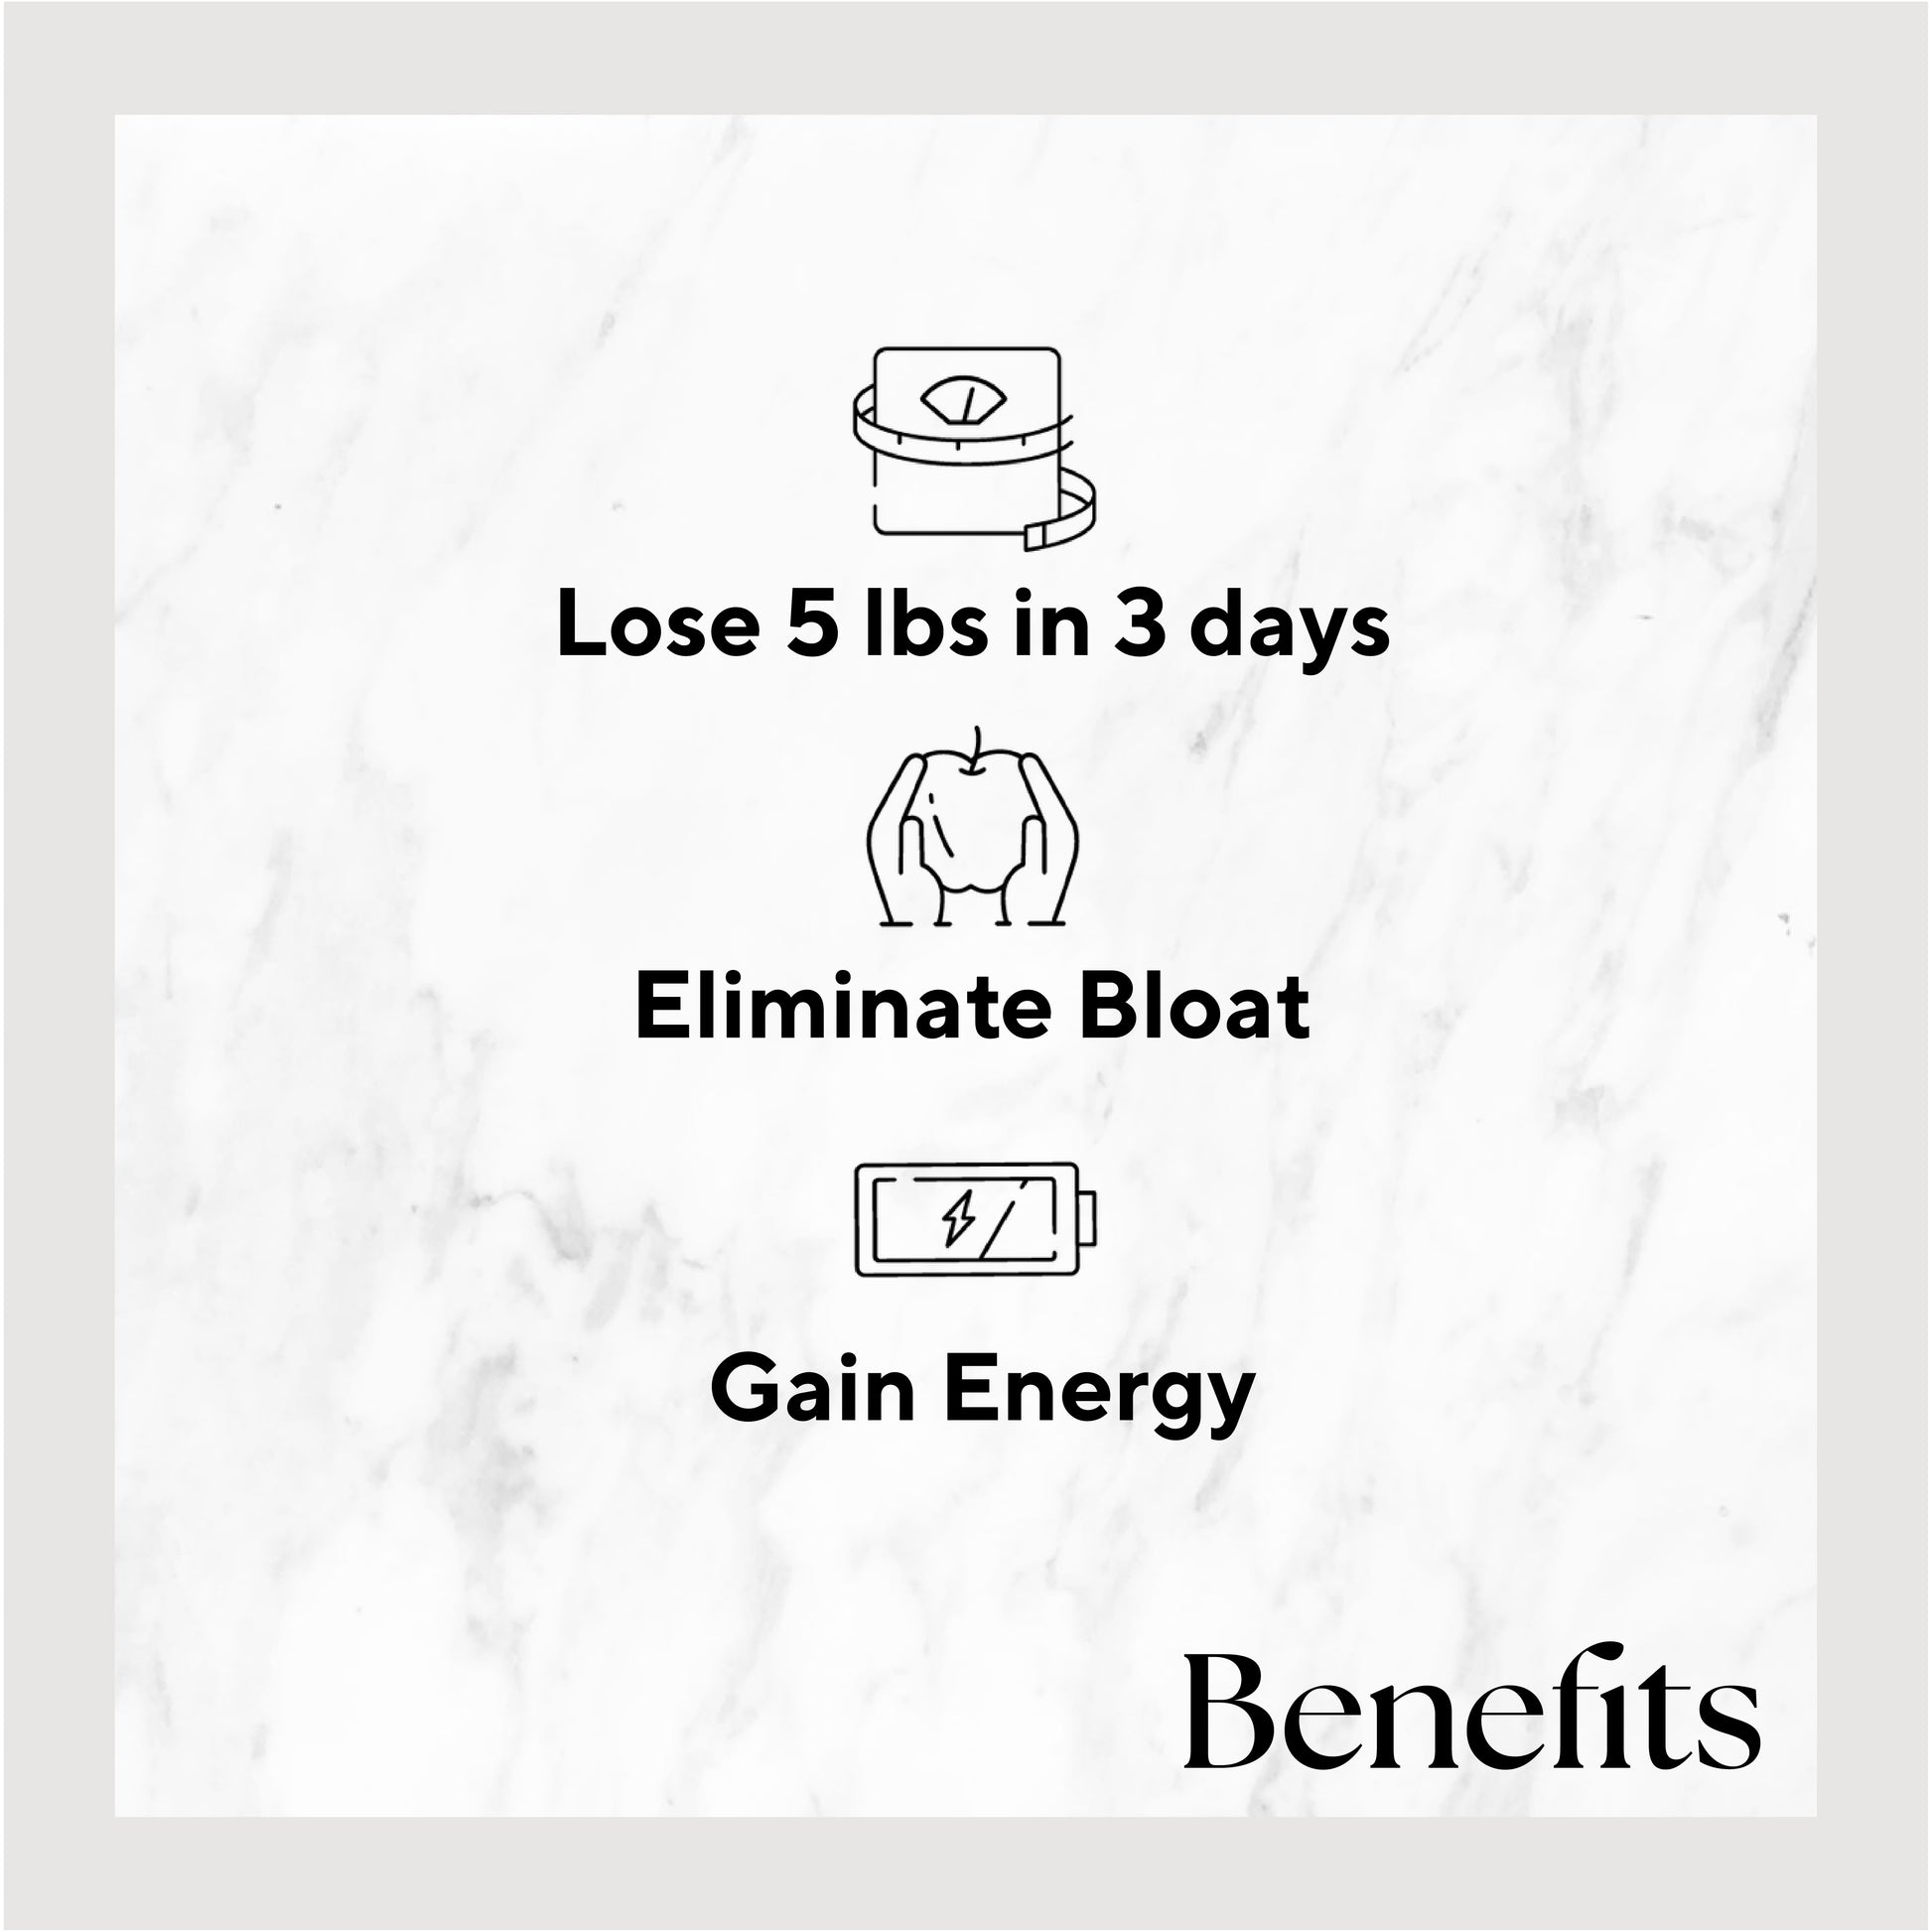 Infographic listing the benefits of the 3-Day Skinny Cleanse. Benefits include: Lose 5 lbs in 3 days, Eliminate Bloat and Gain Energy.